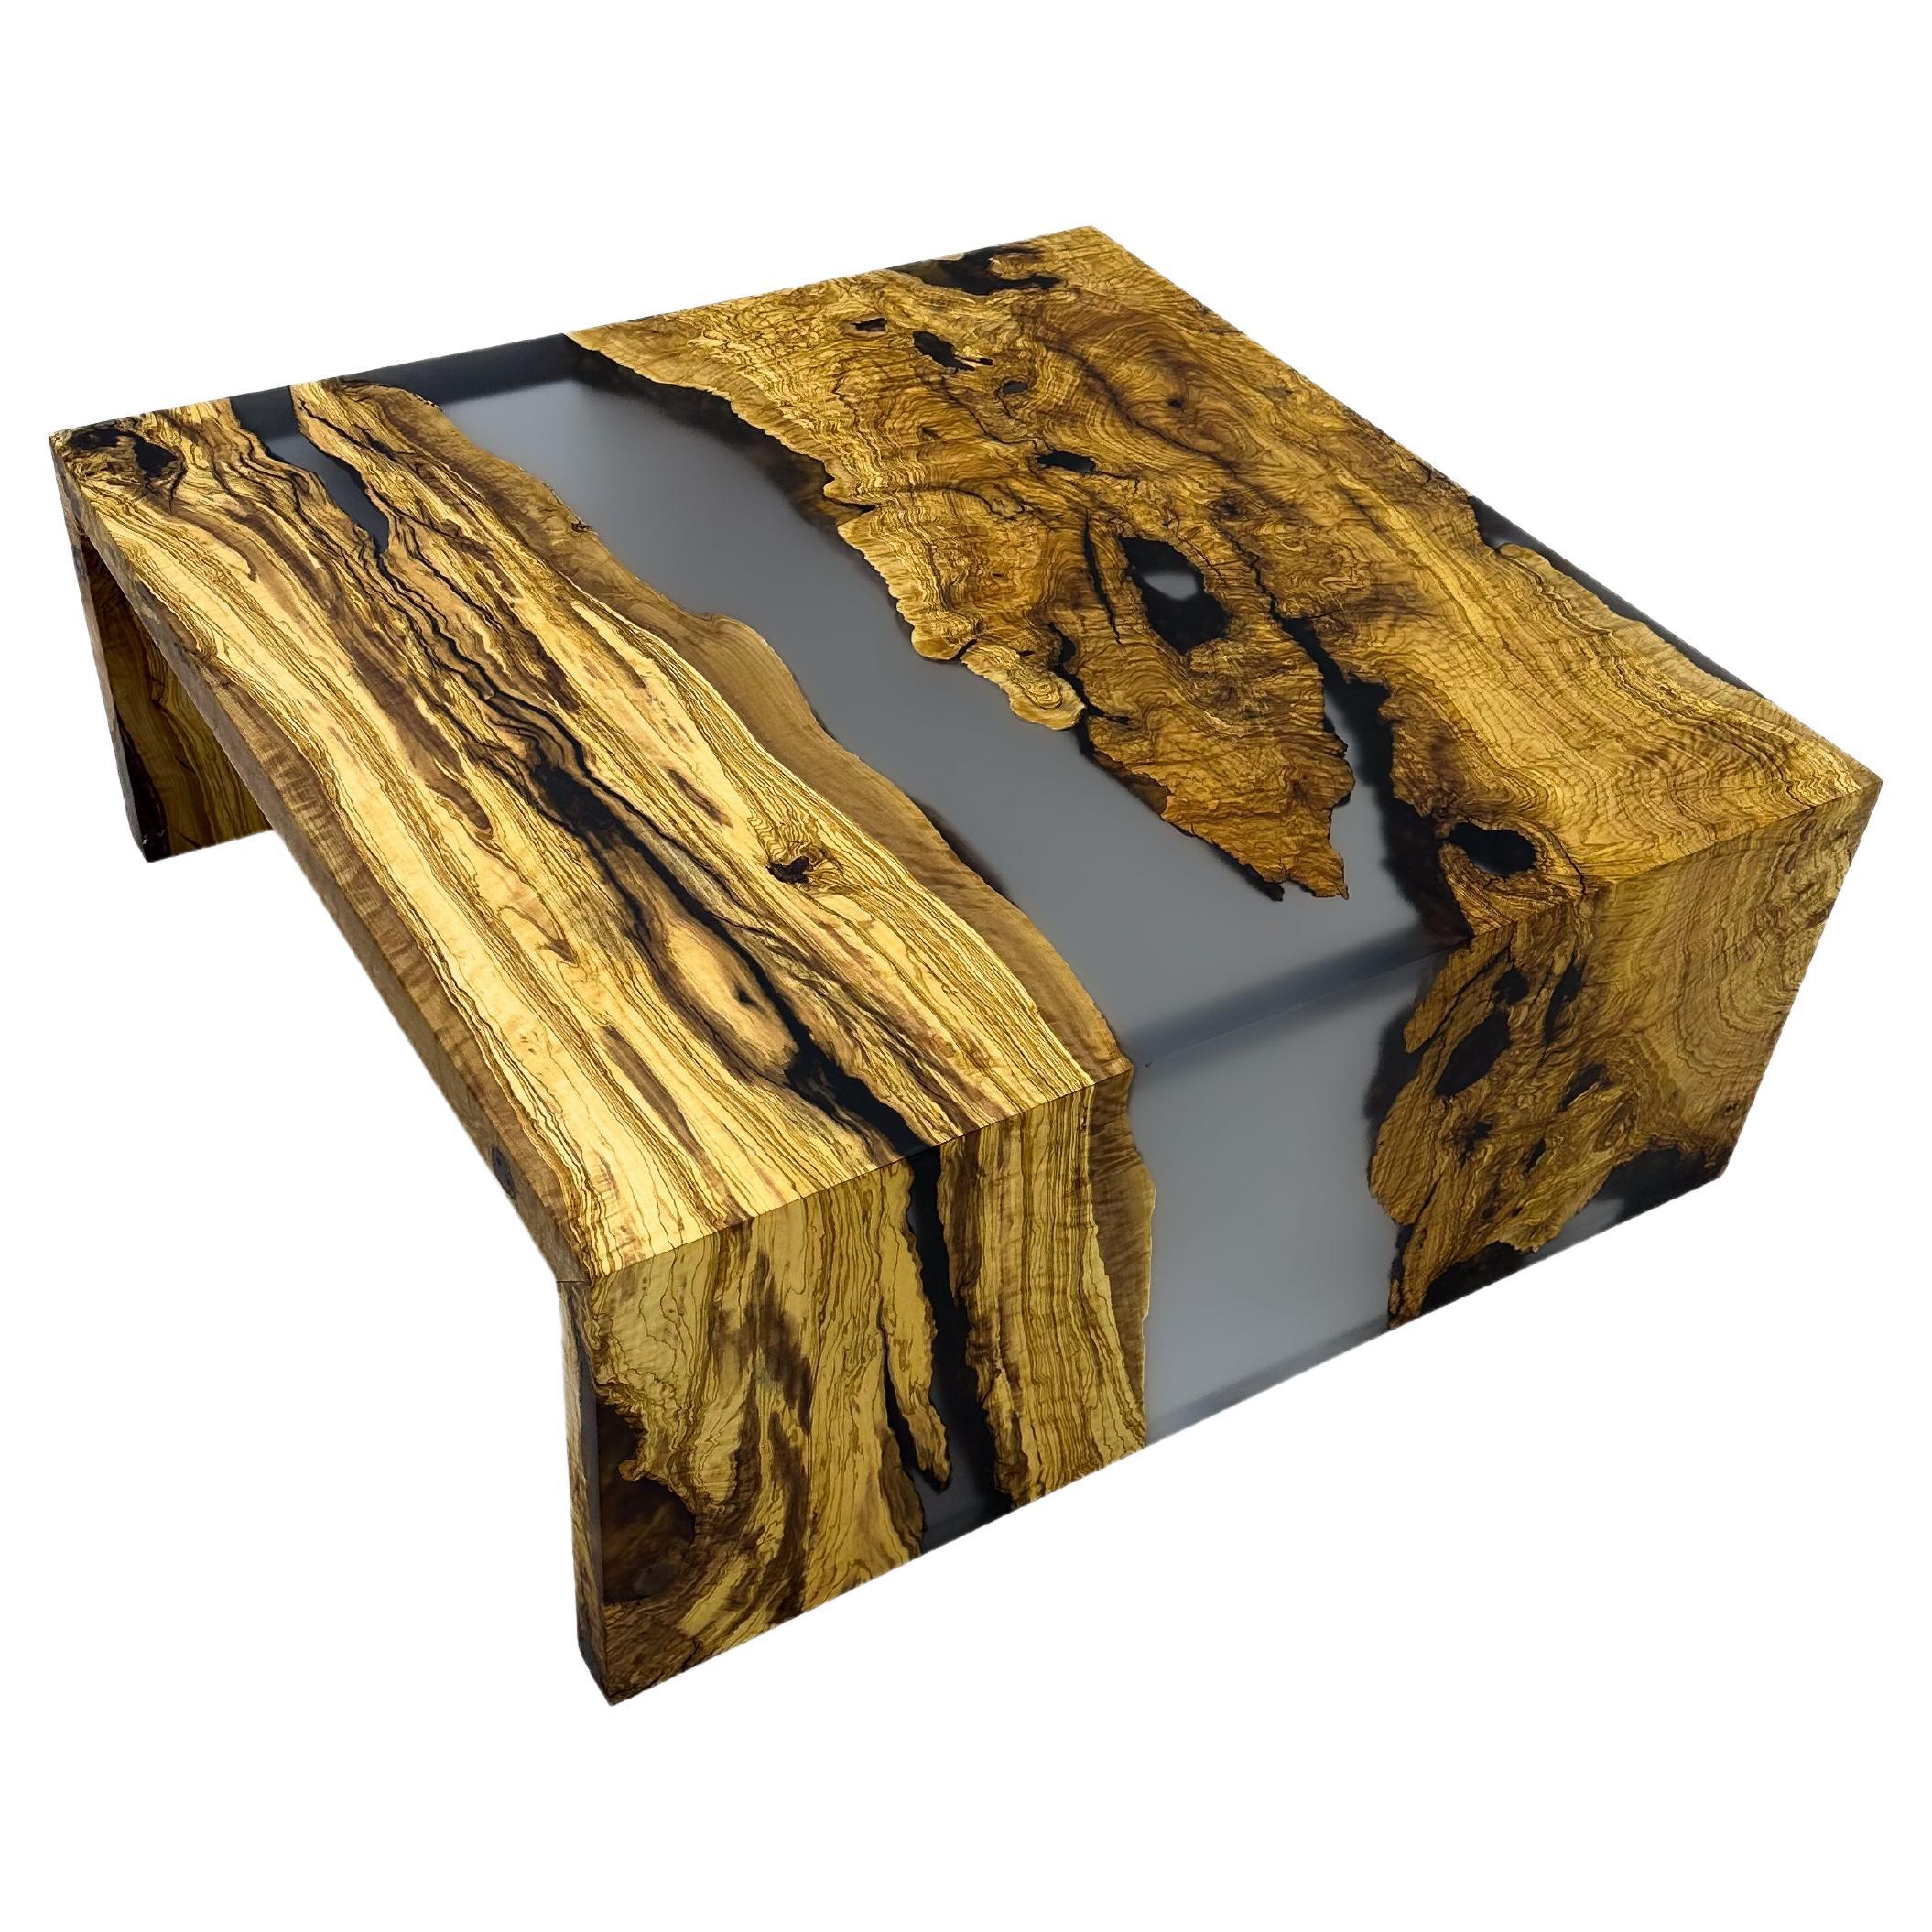 Watefall Epoxy Coffee Table

Handcrafted by skilled artisans, this coffee table seamlessly fuses natural wood with gray epoxy resin, creating a captivating piece that captures nature's beauty. 
Its exceptional design and craftsmanship make it a